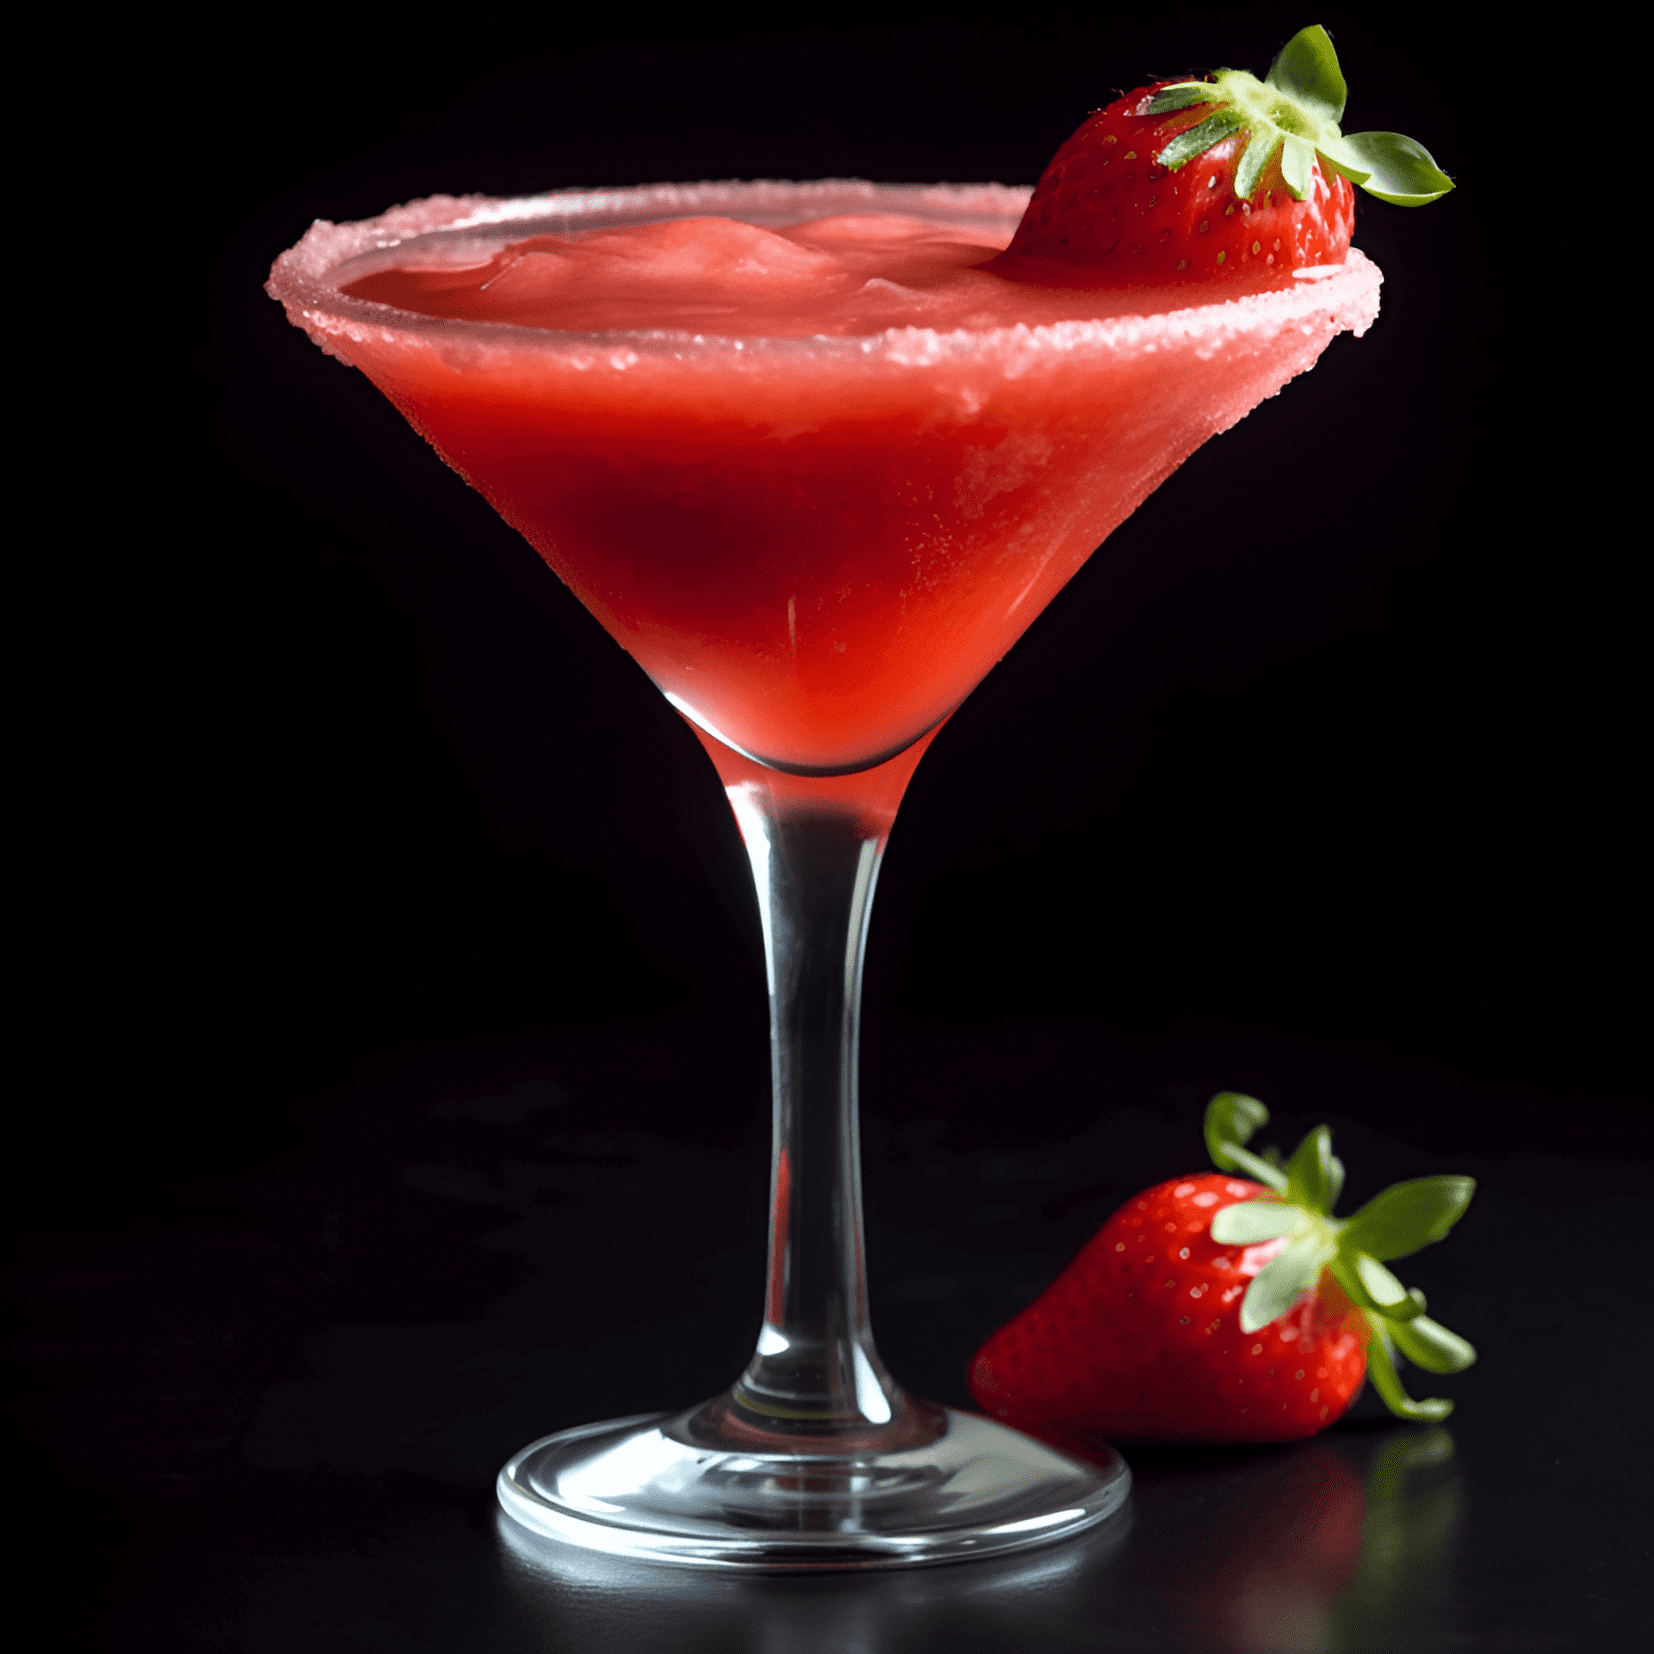 Strawberry Daiquiri Cocktail Recipe - The Strawberry Daiquiri is a sweet, fruity, and slightly tart cocktail. It has a refreshing strawberry flavor, balanced by the sourness of the lime juice and the smoothness of the rum.